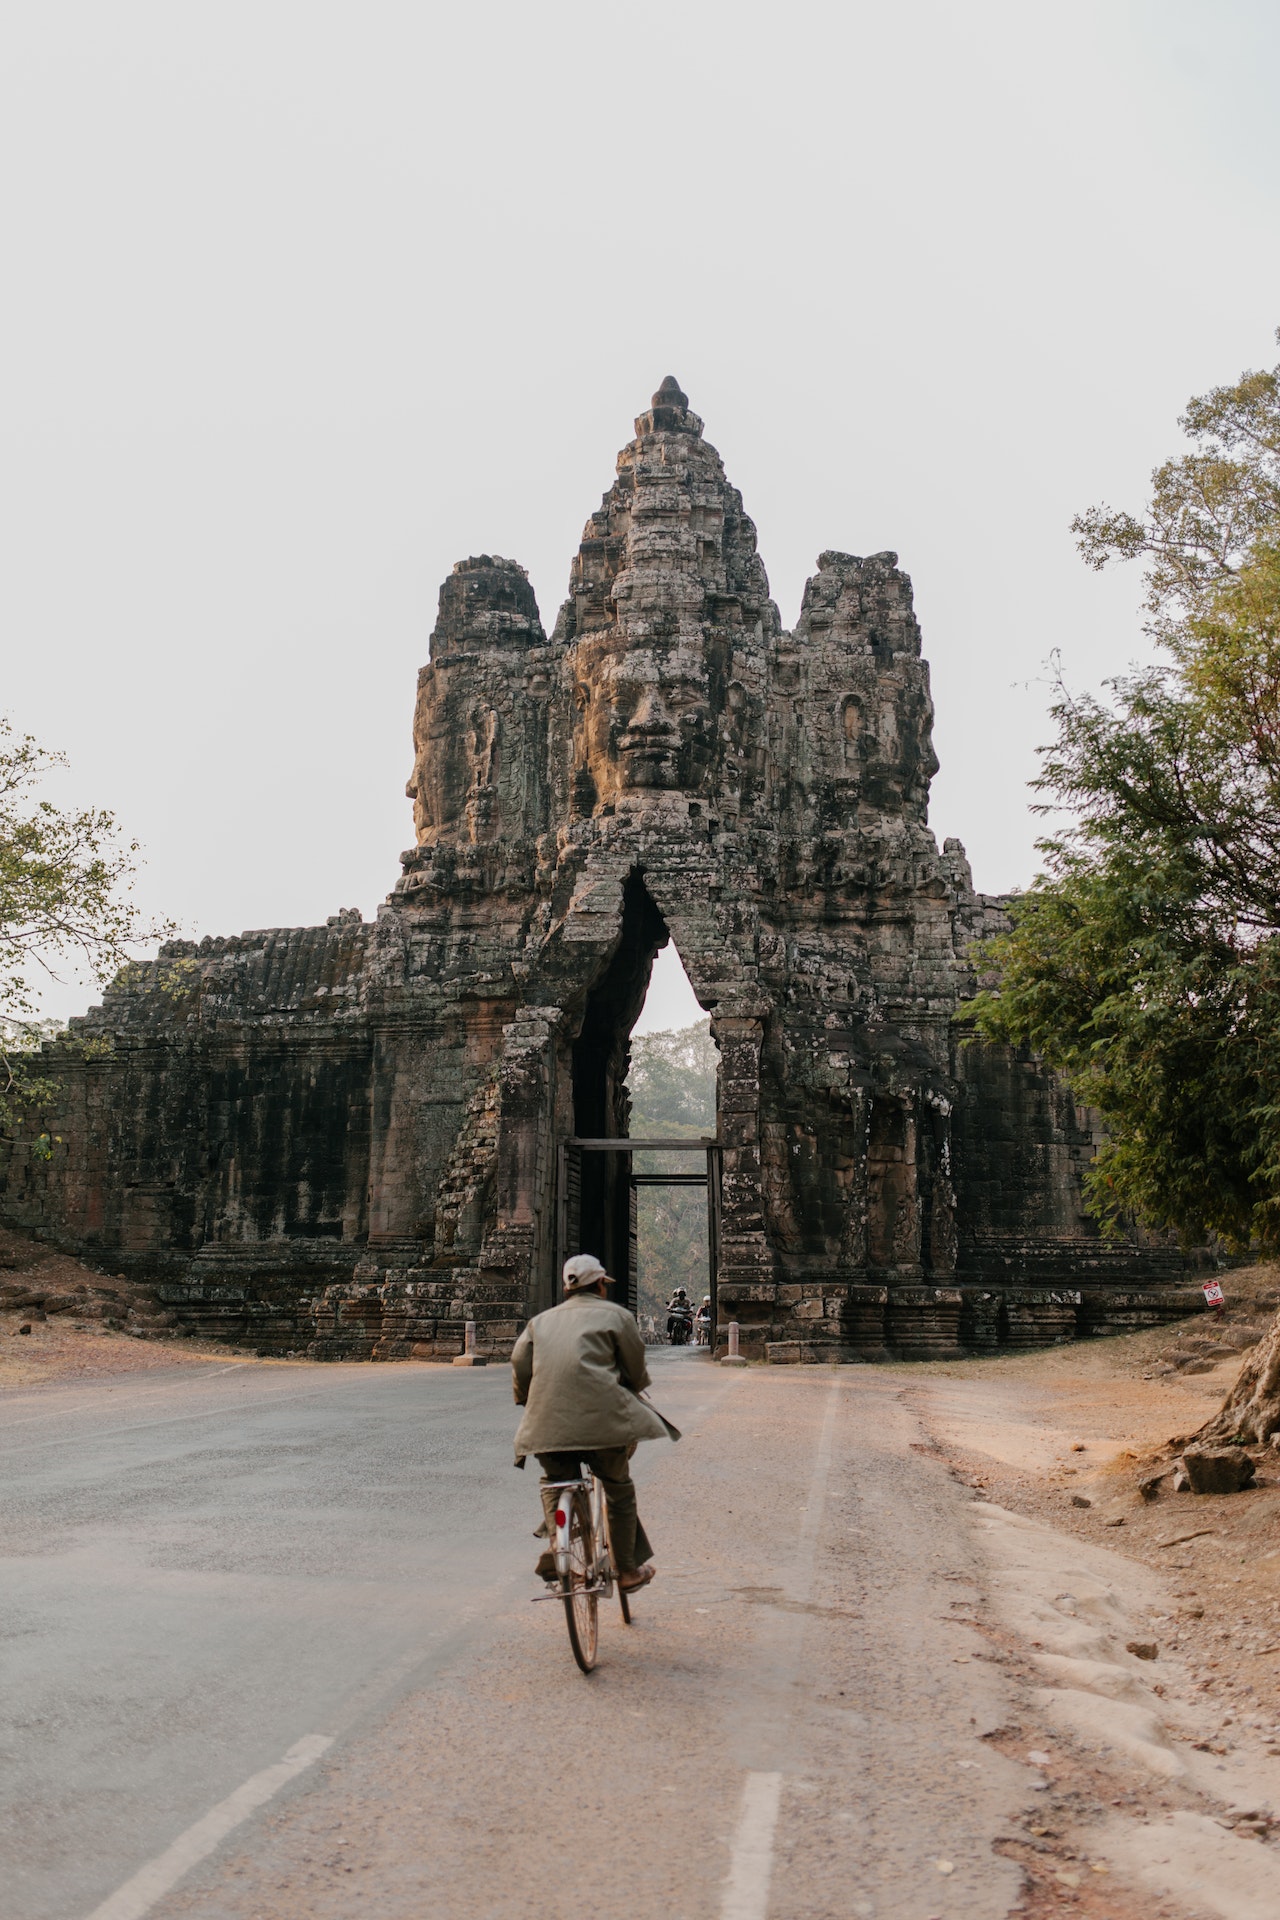 Finding and Attracting Talent in Cambodia